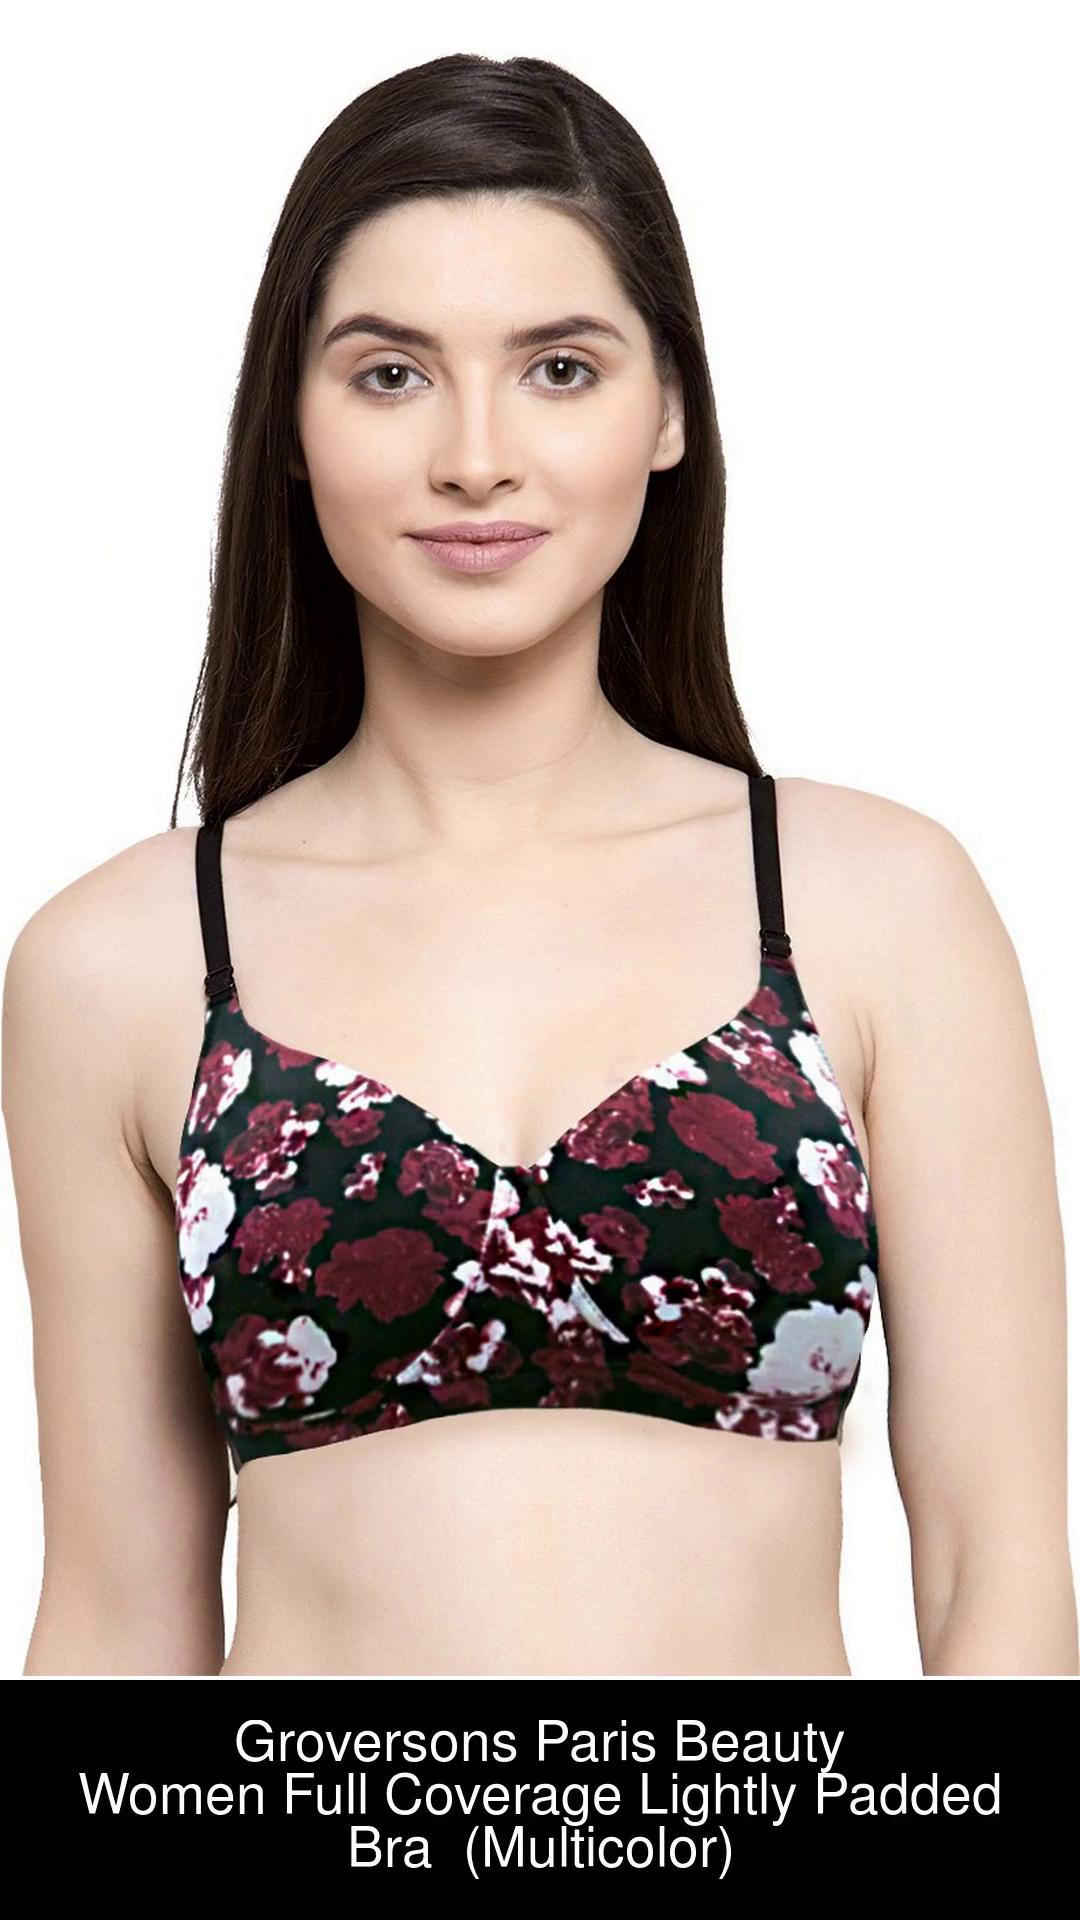 Groversons Paris Beauty Light padded wirefree T-shirt bra in big